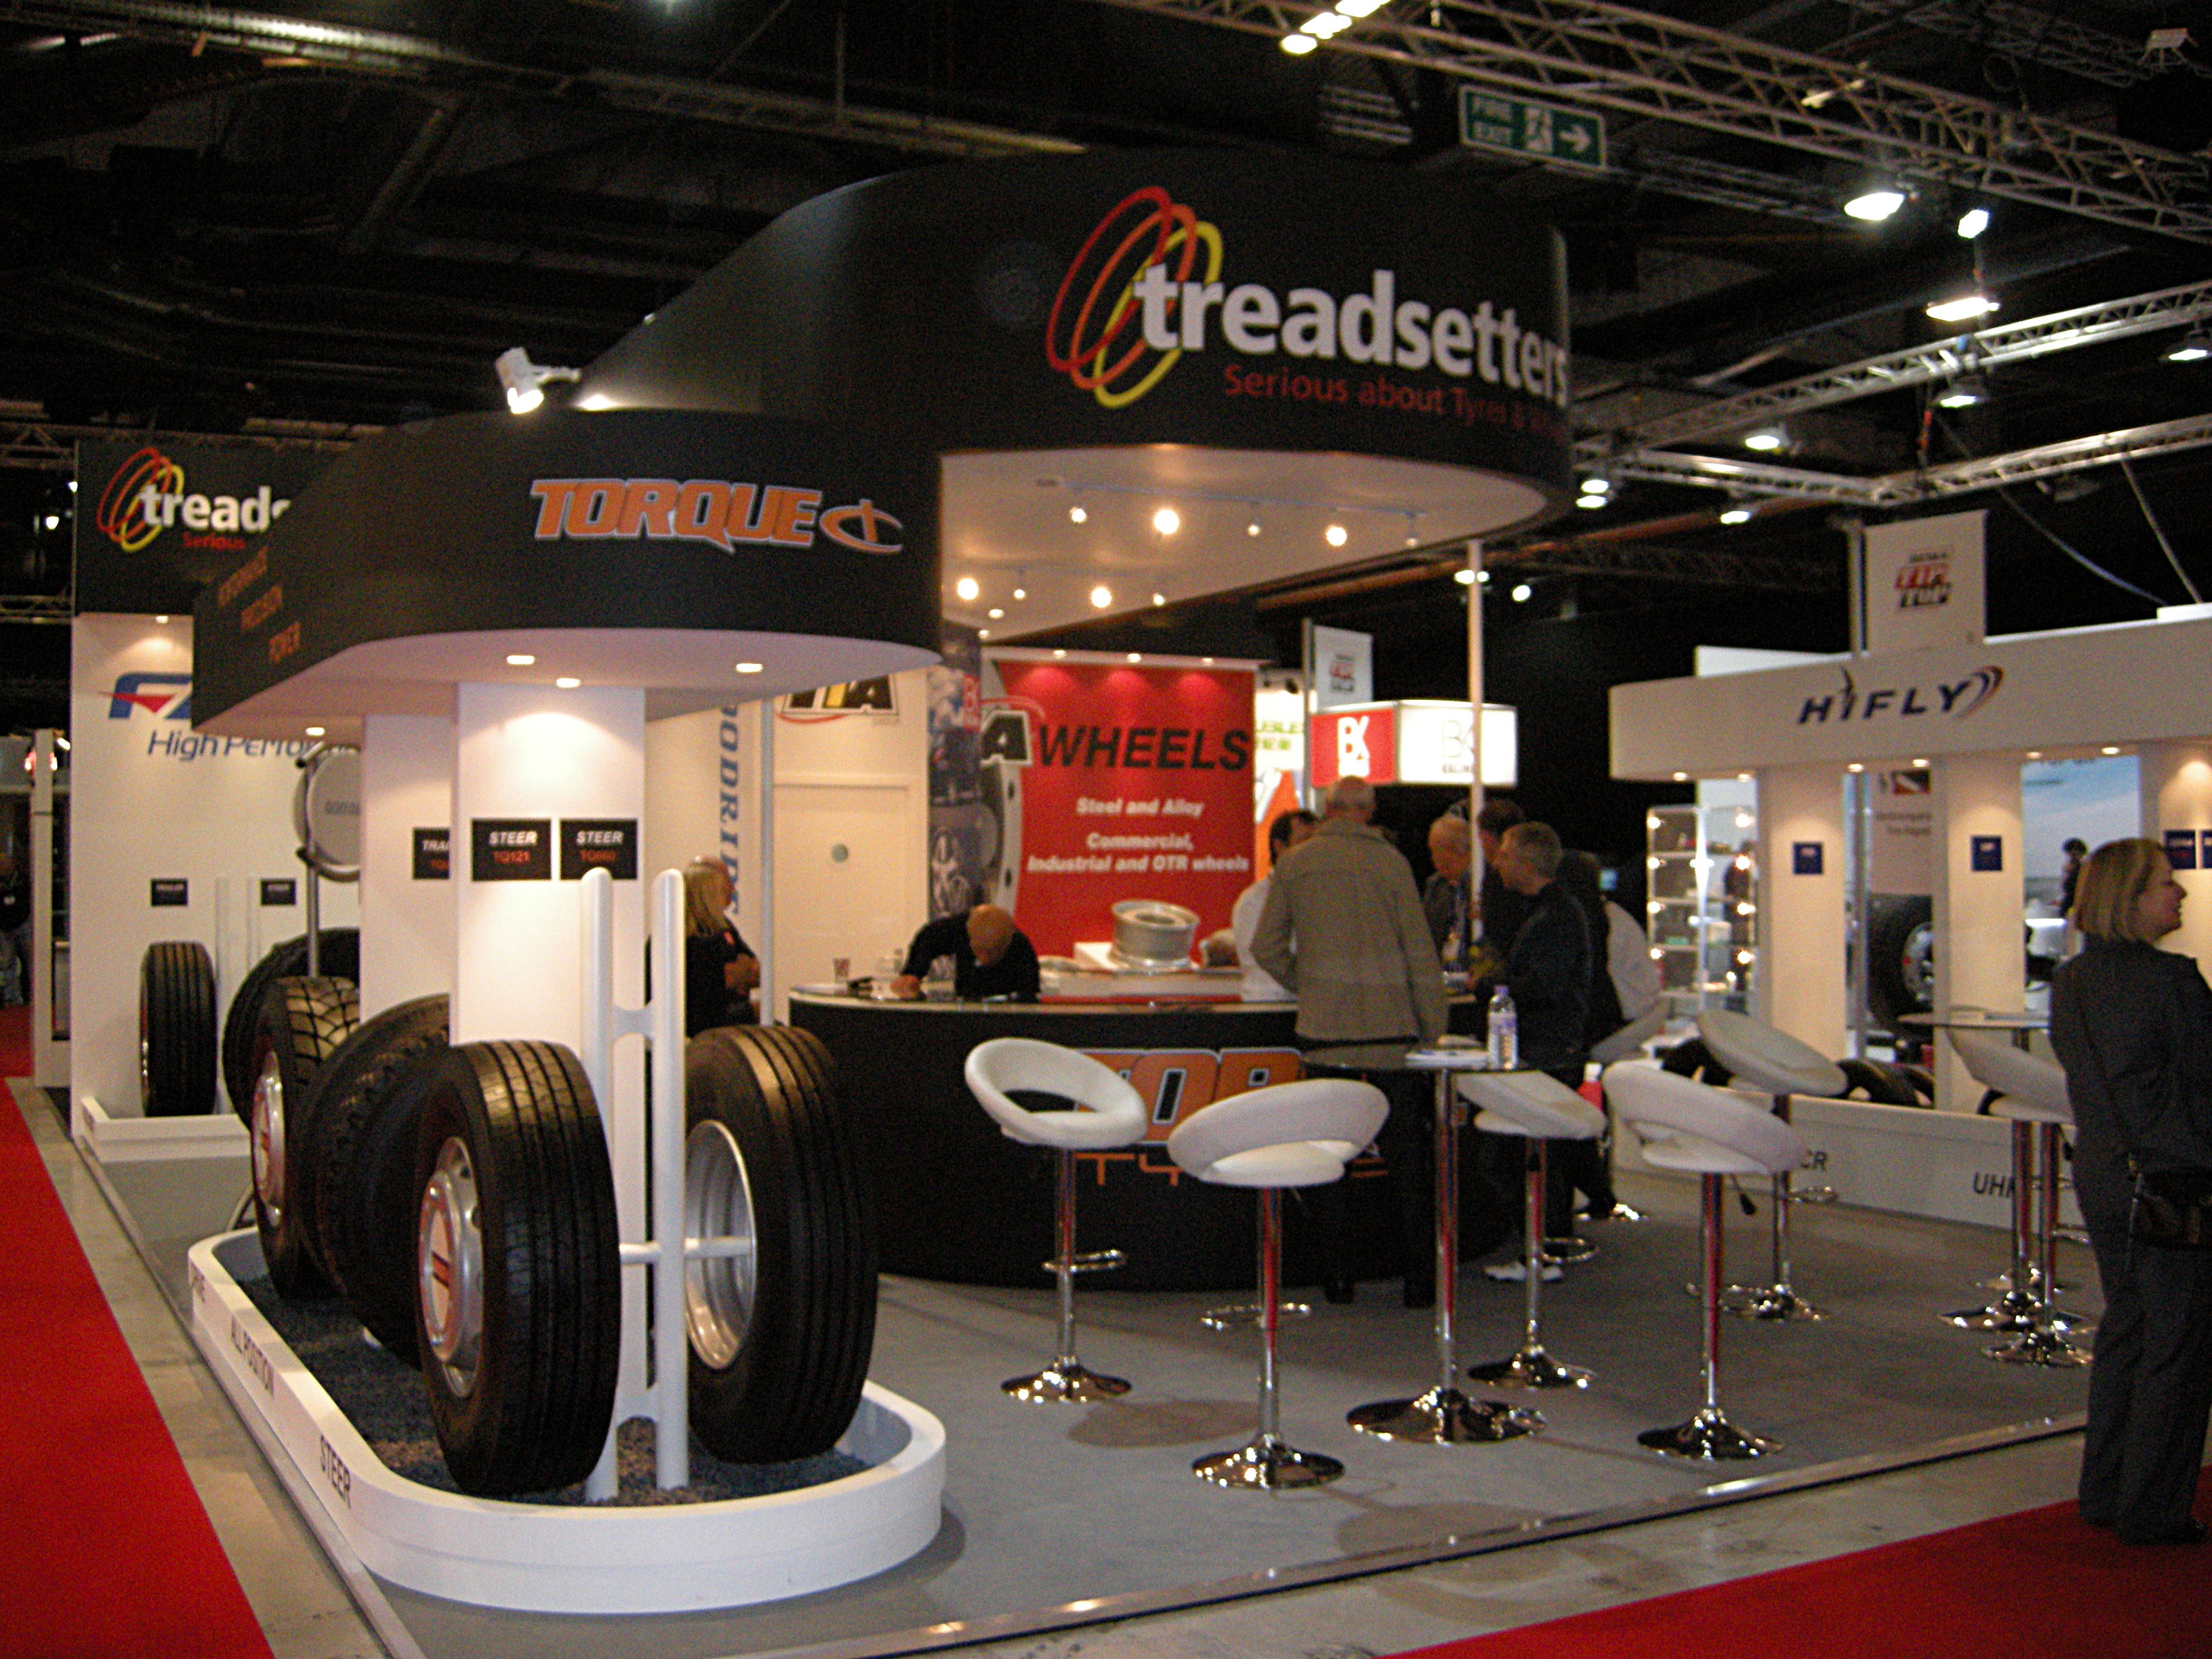 Treadsetters wins best stand award at Brityrex 2014